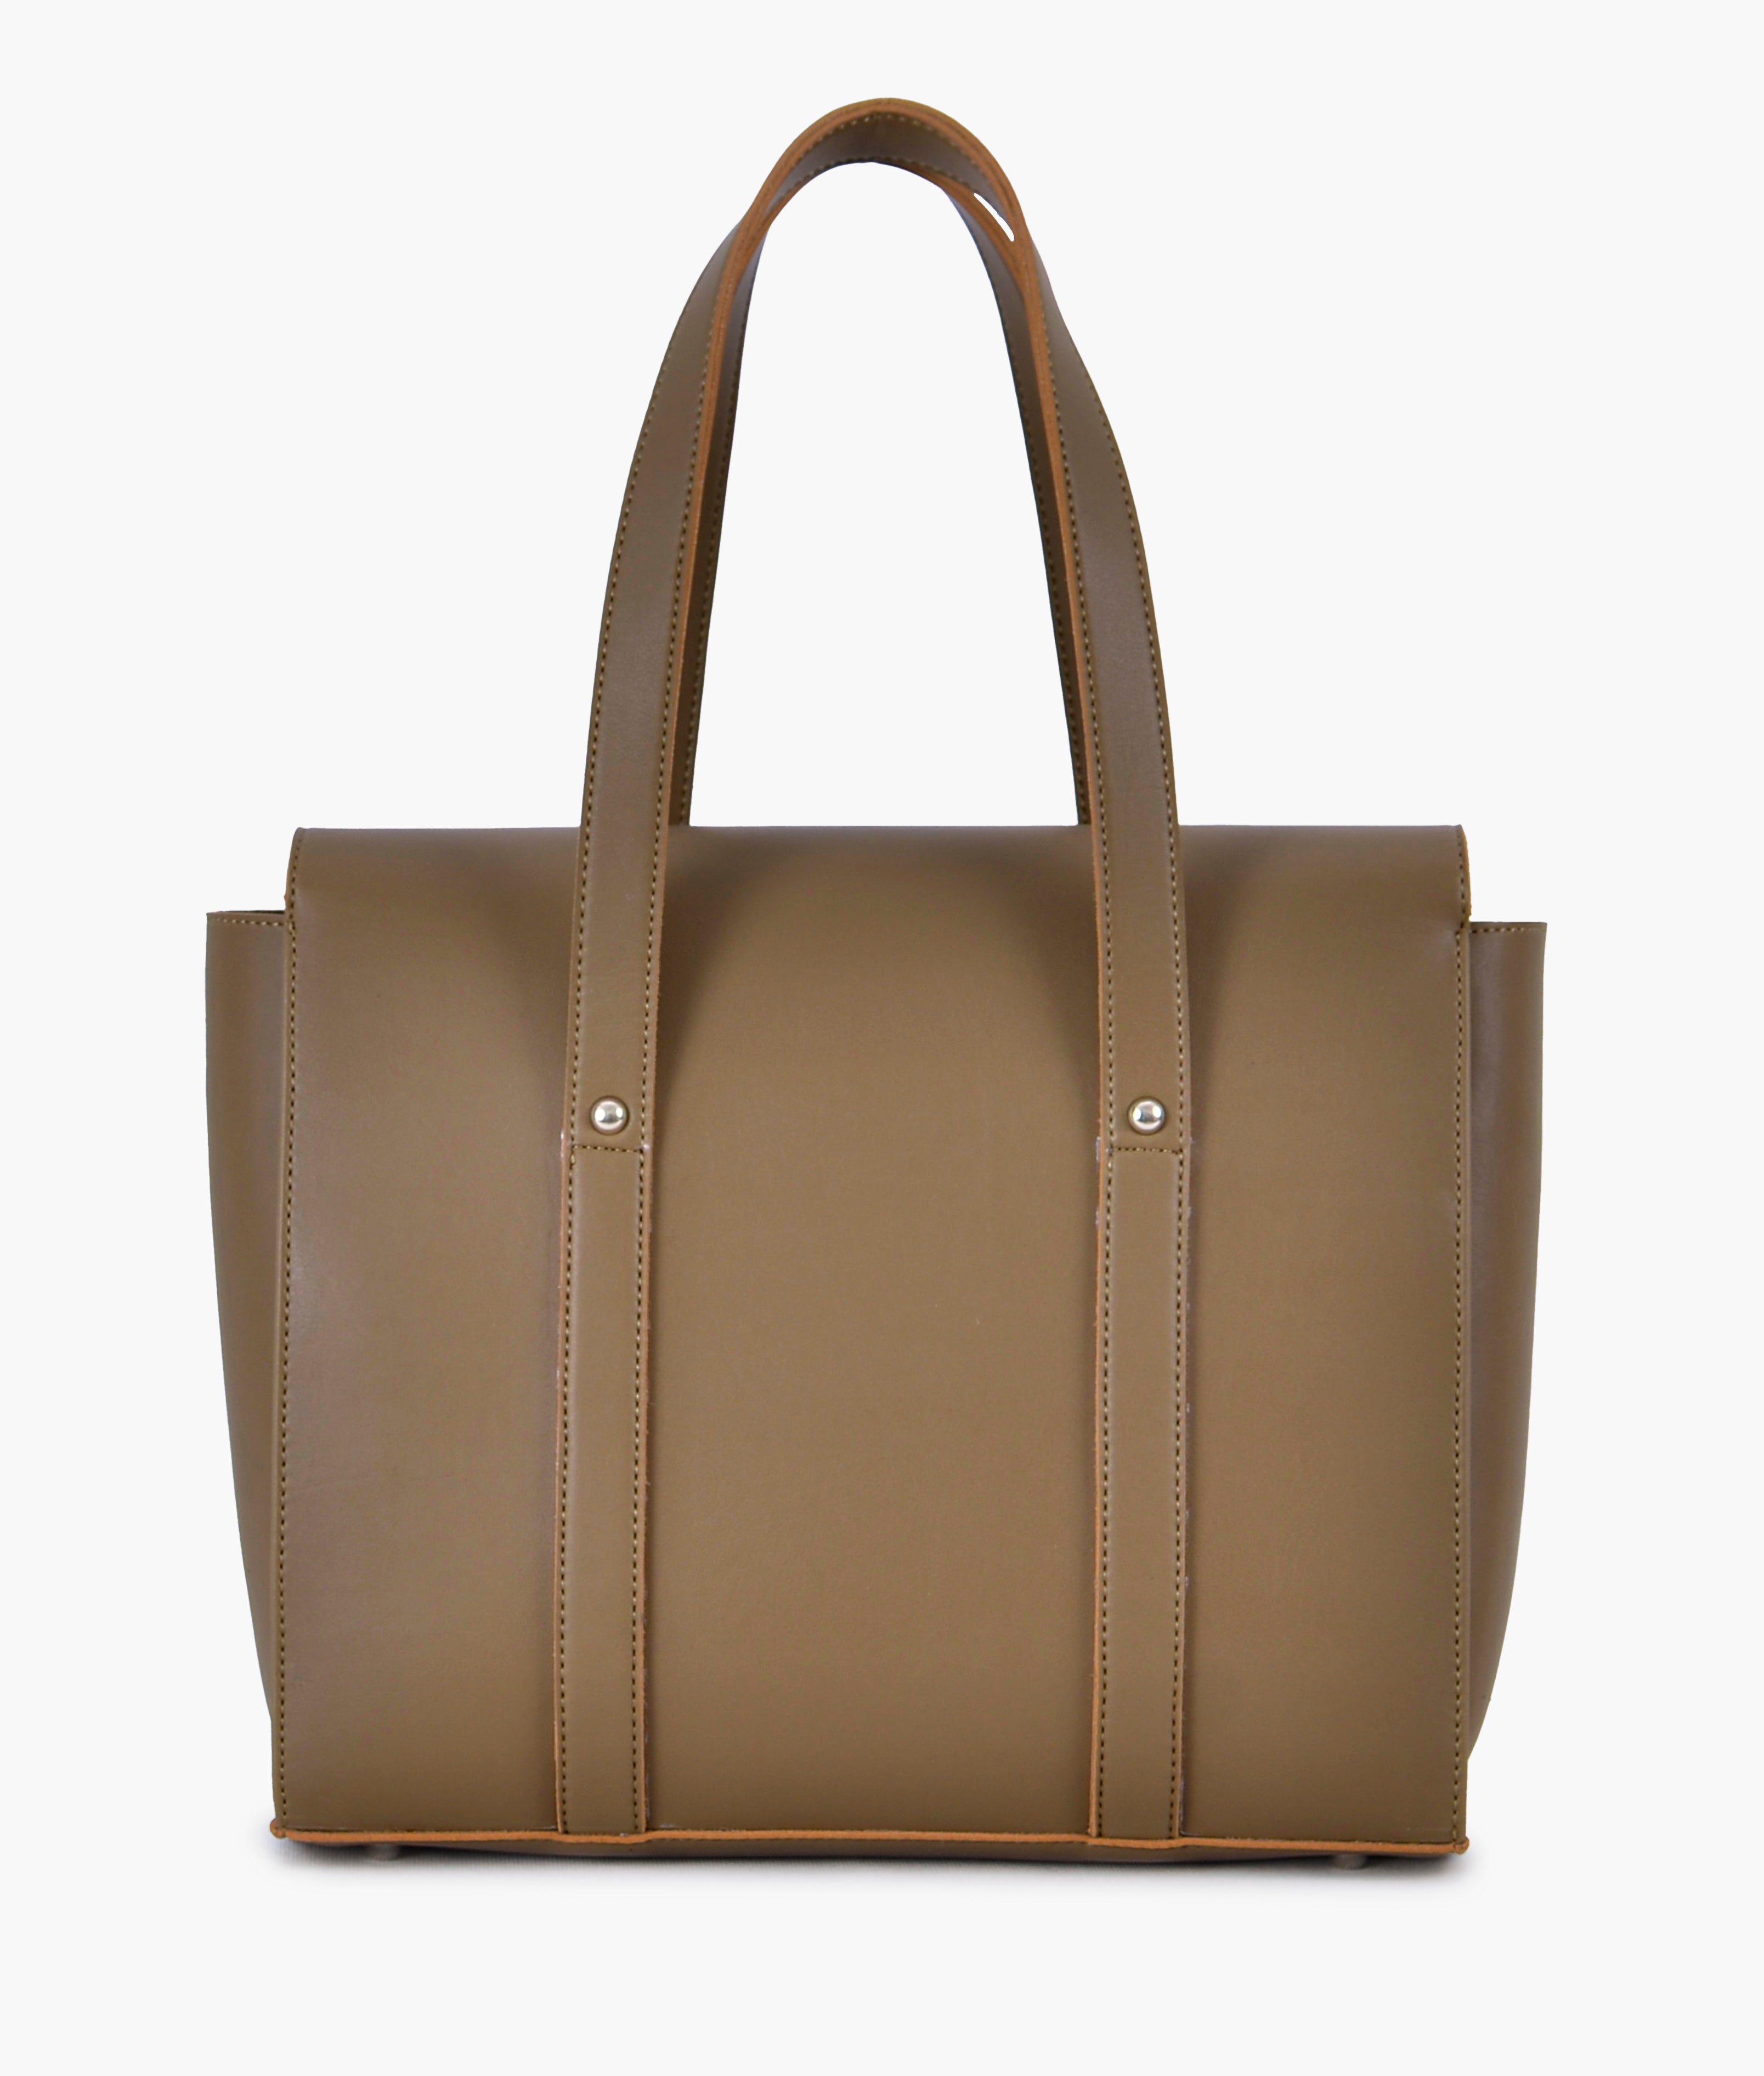 Coffee carry-all satchel bag